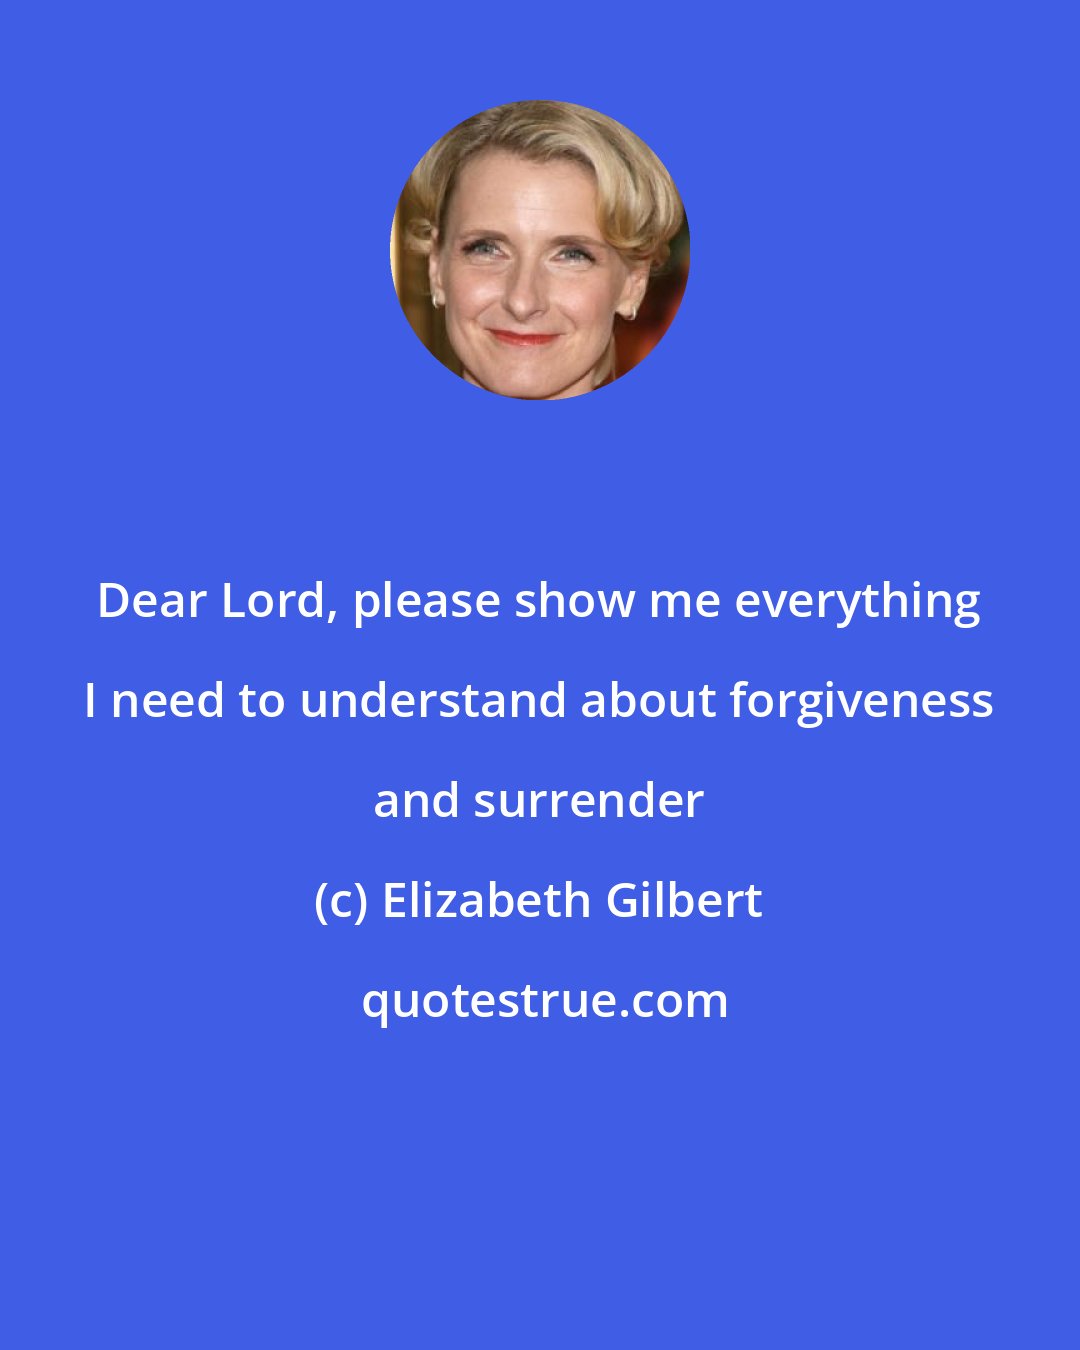 Elizabeth Gilbert: Dear Lord, please show me everything I need to understand about forgiveness and surrender